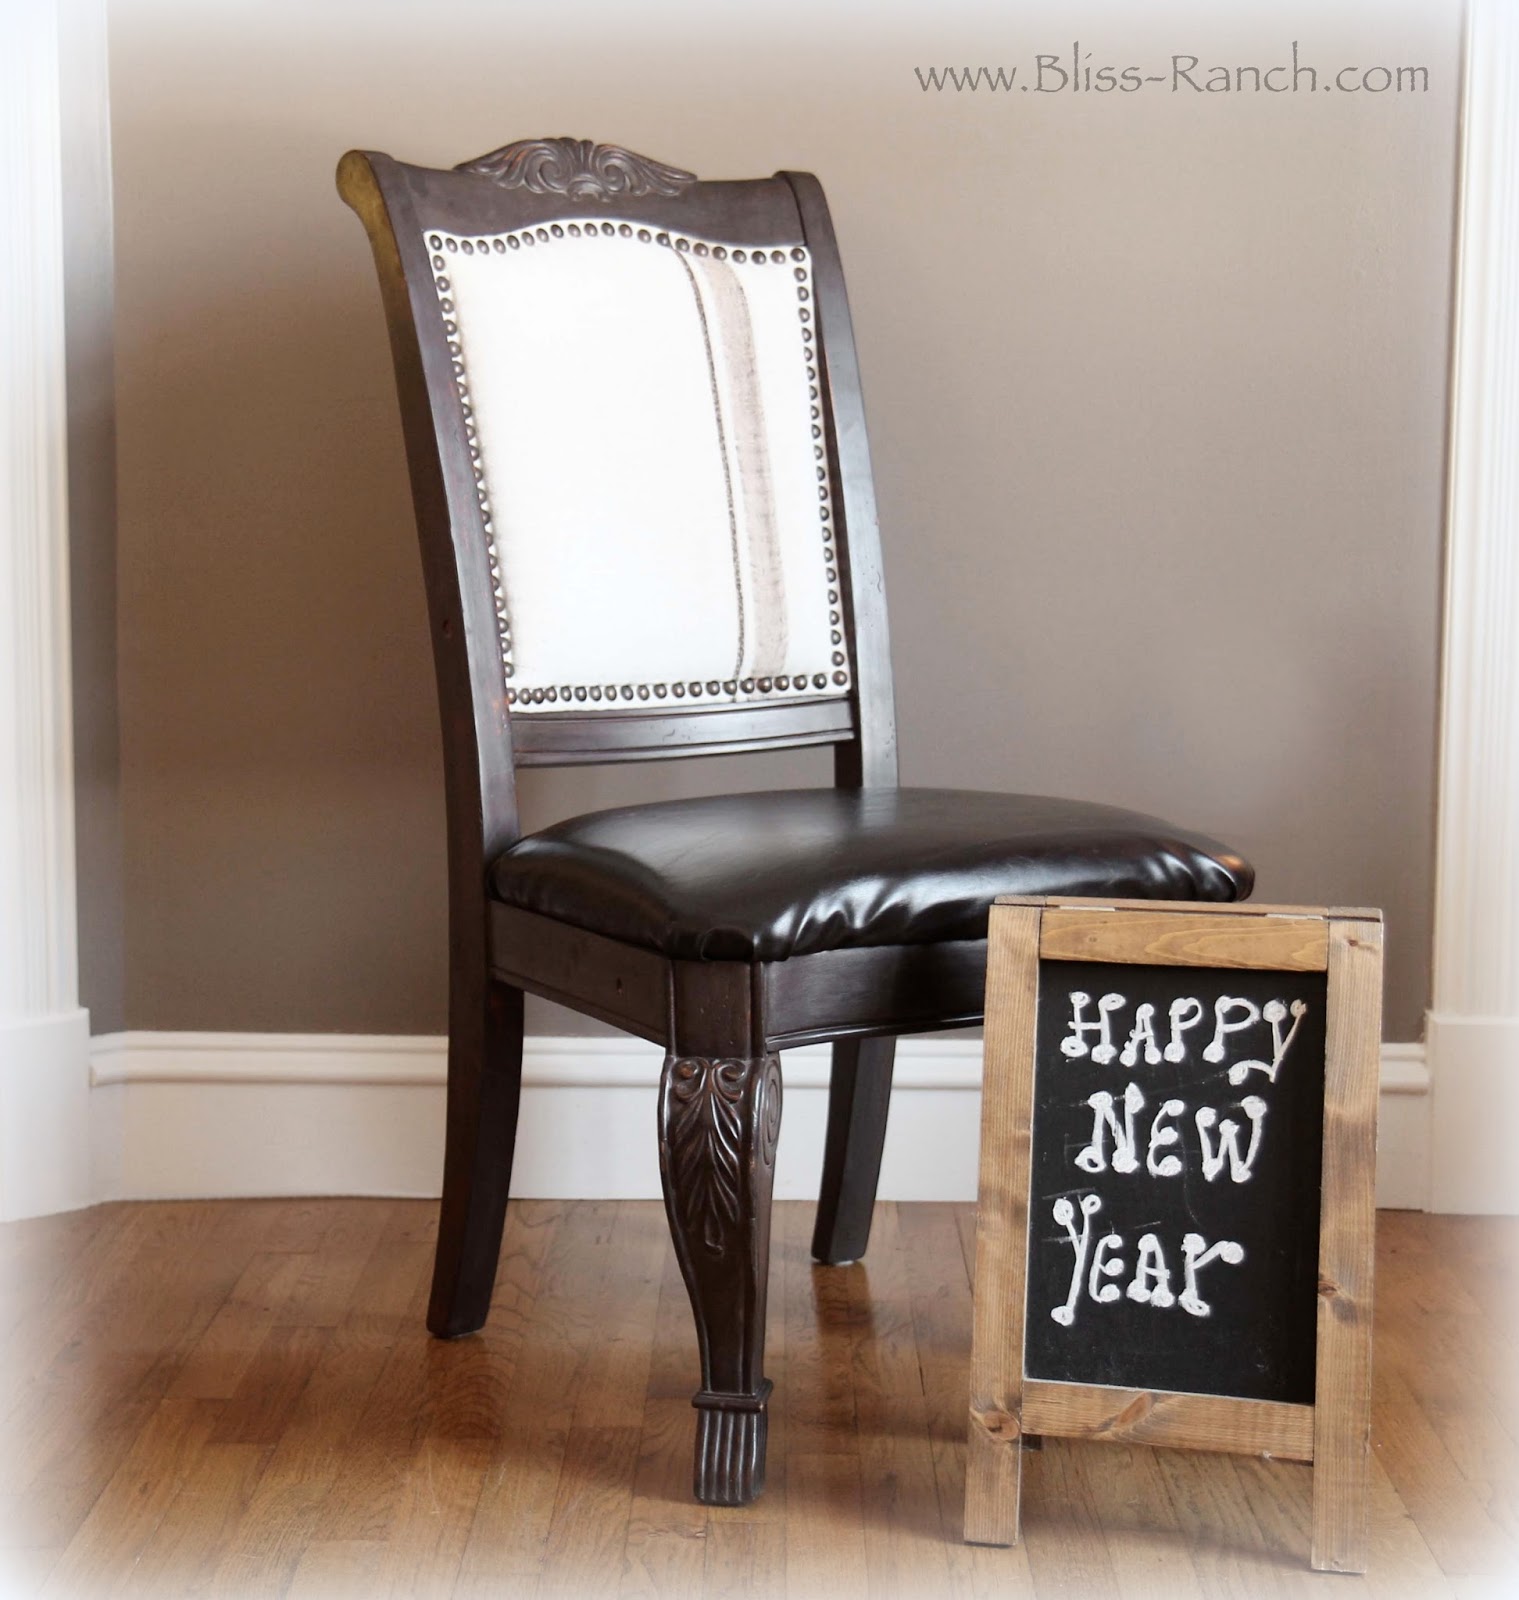 Dining Room Chairs With Vintage Grain Sack Look, Bliss-Ranch.com